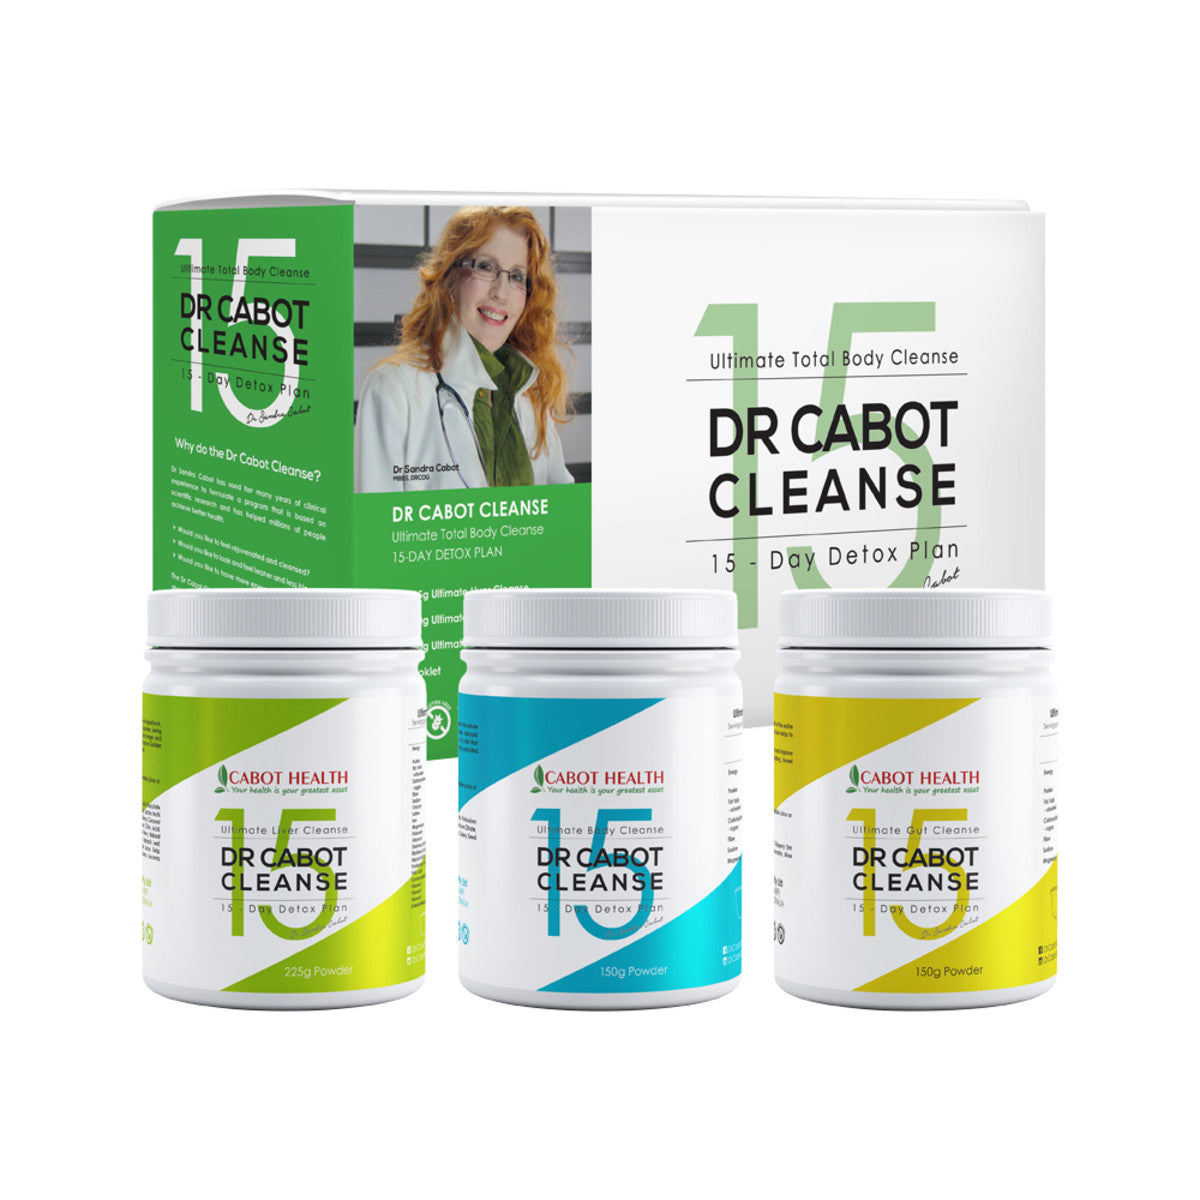 Cabot Health - Dr Cabot Cleanse 15 Day Detox Pack